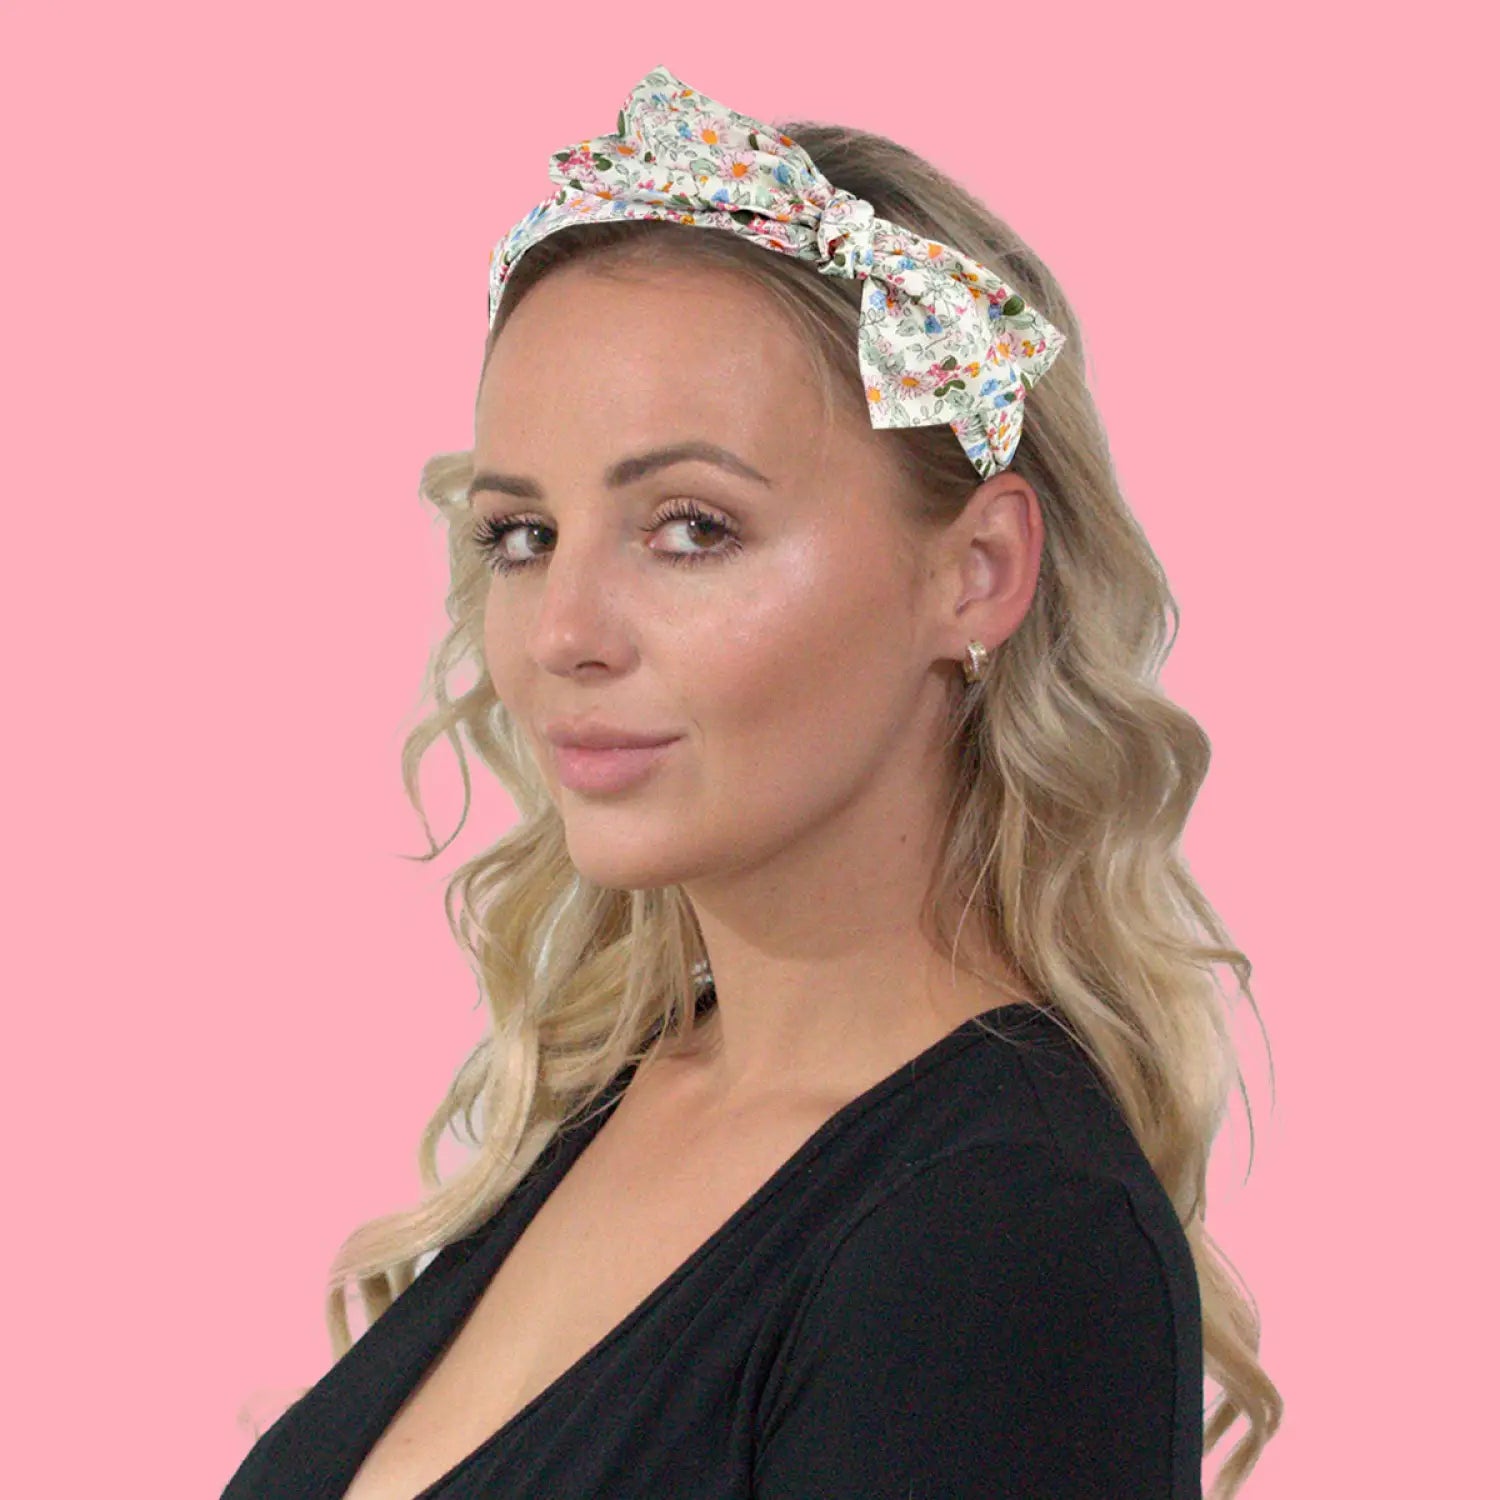 Mini Floral Headband with White and Pink Floral Print